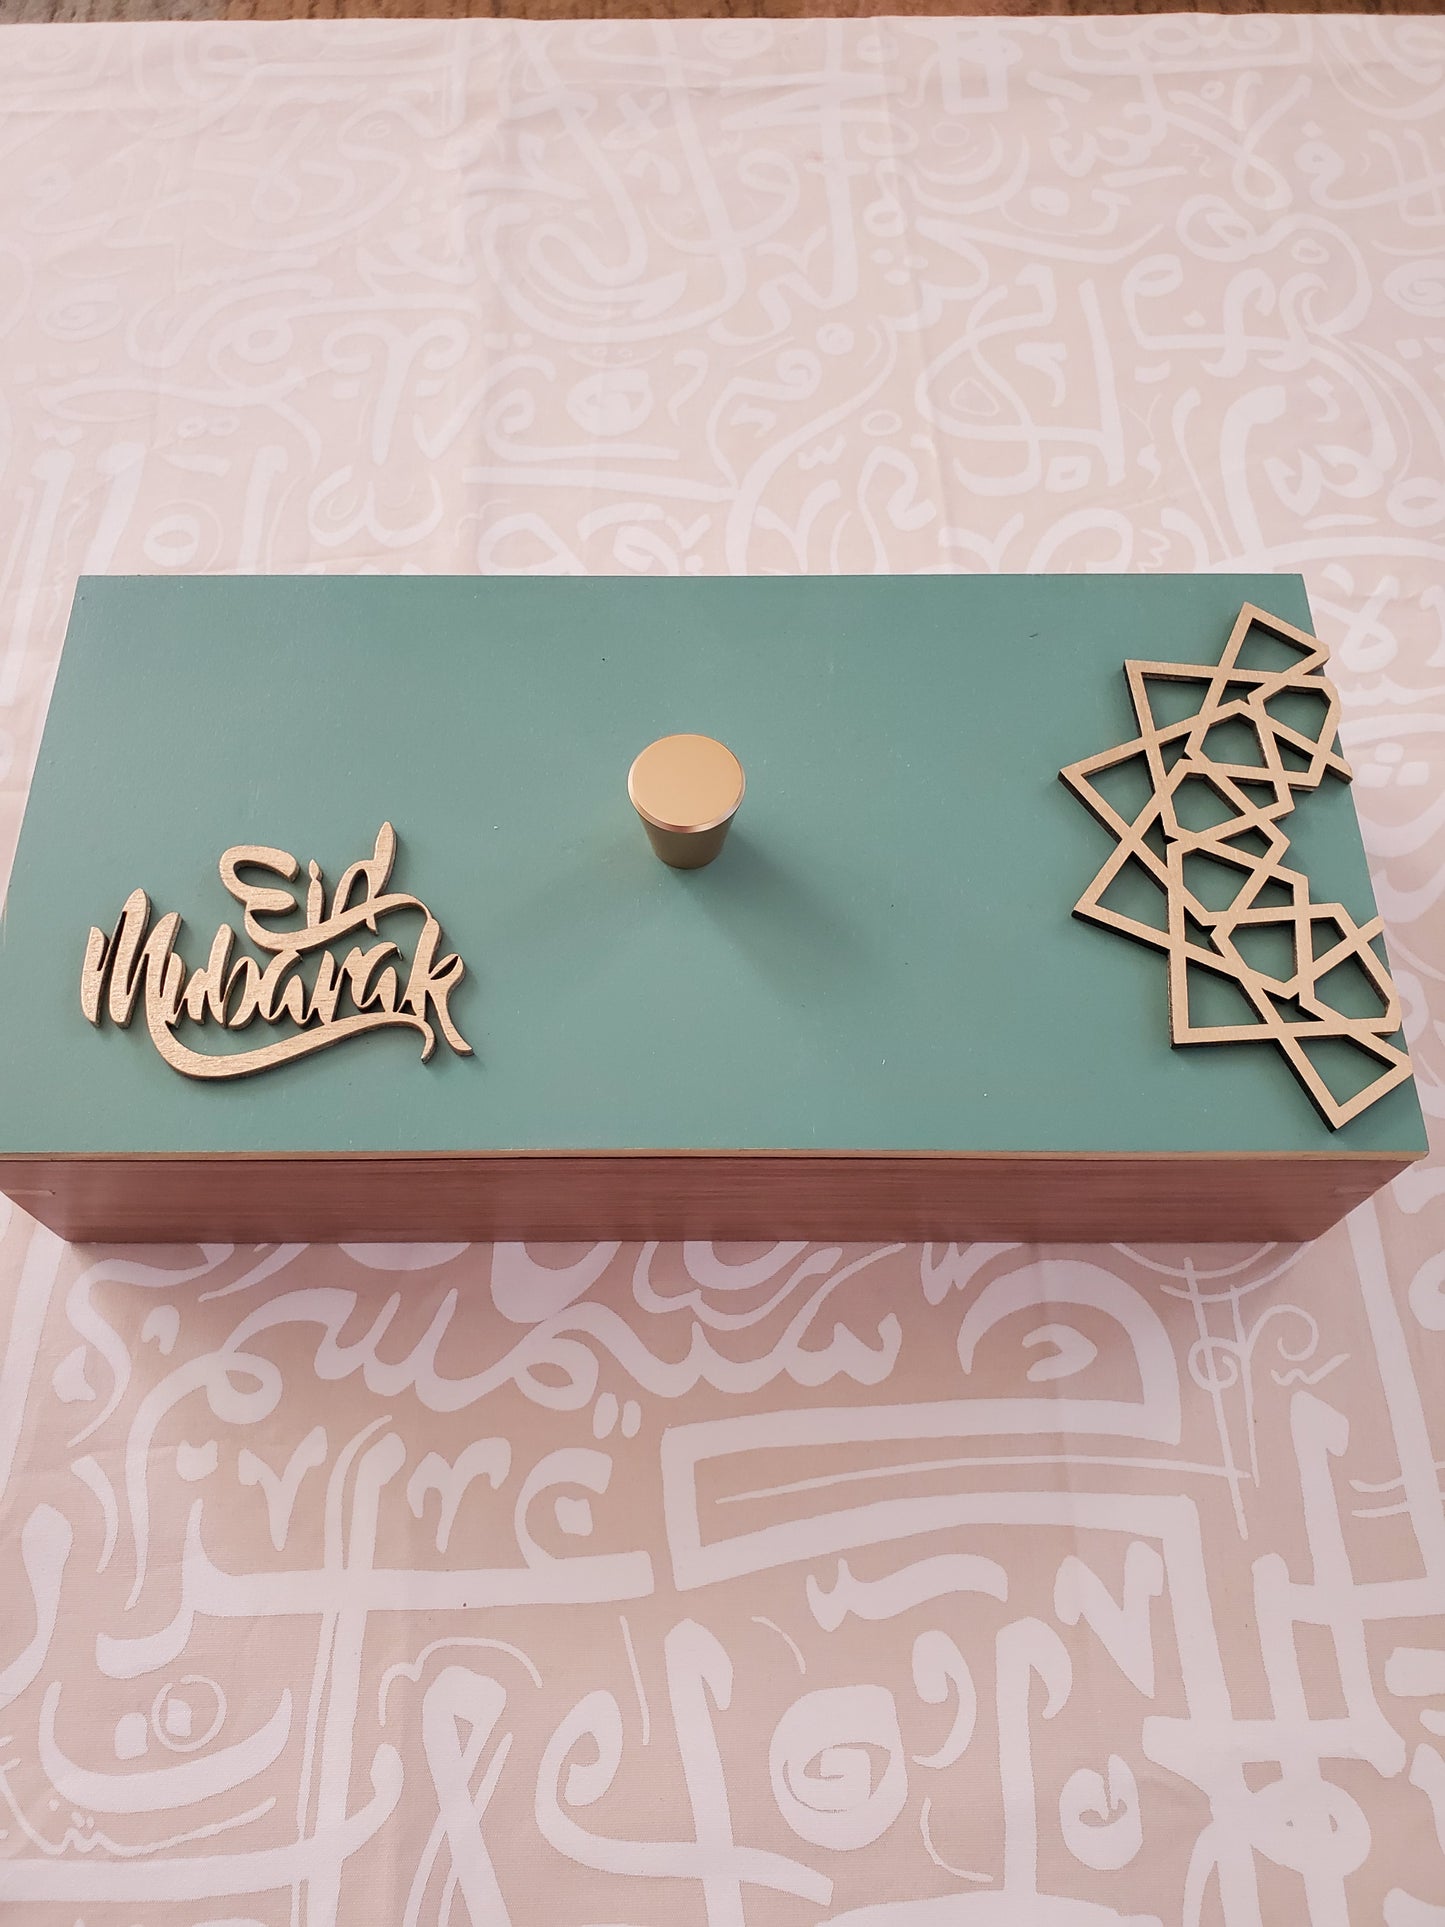 Serving box with decorative lid